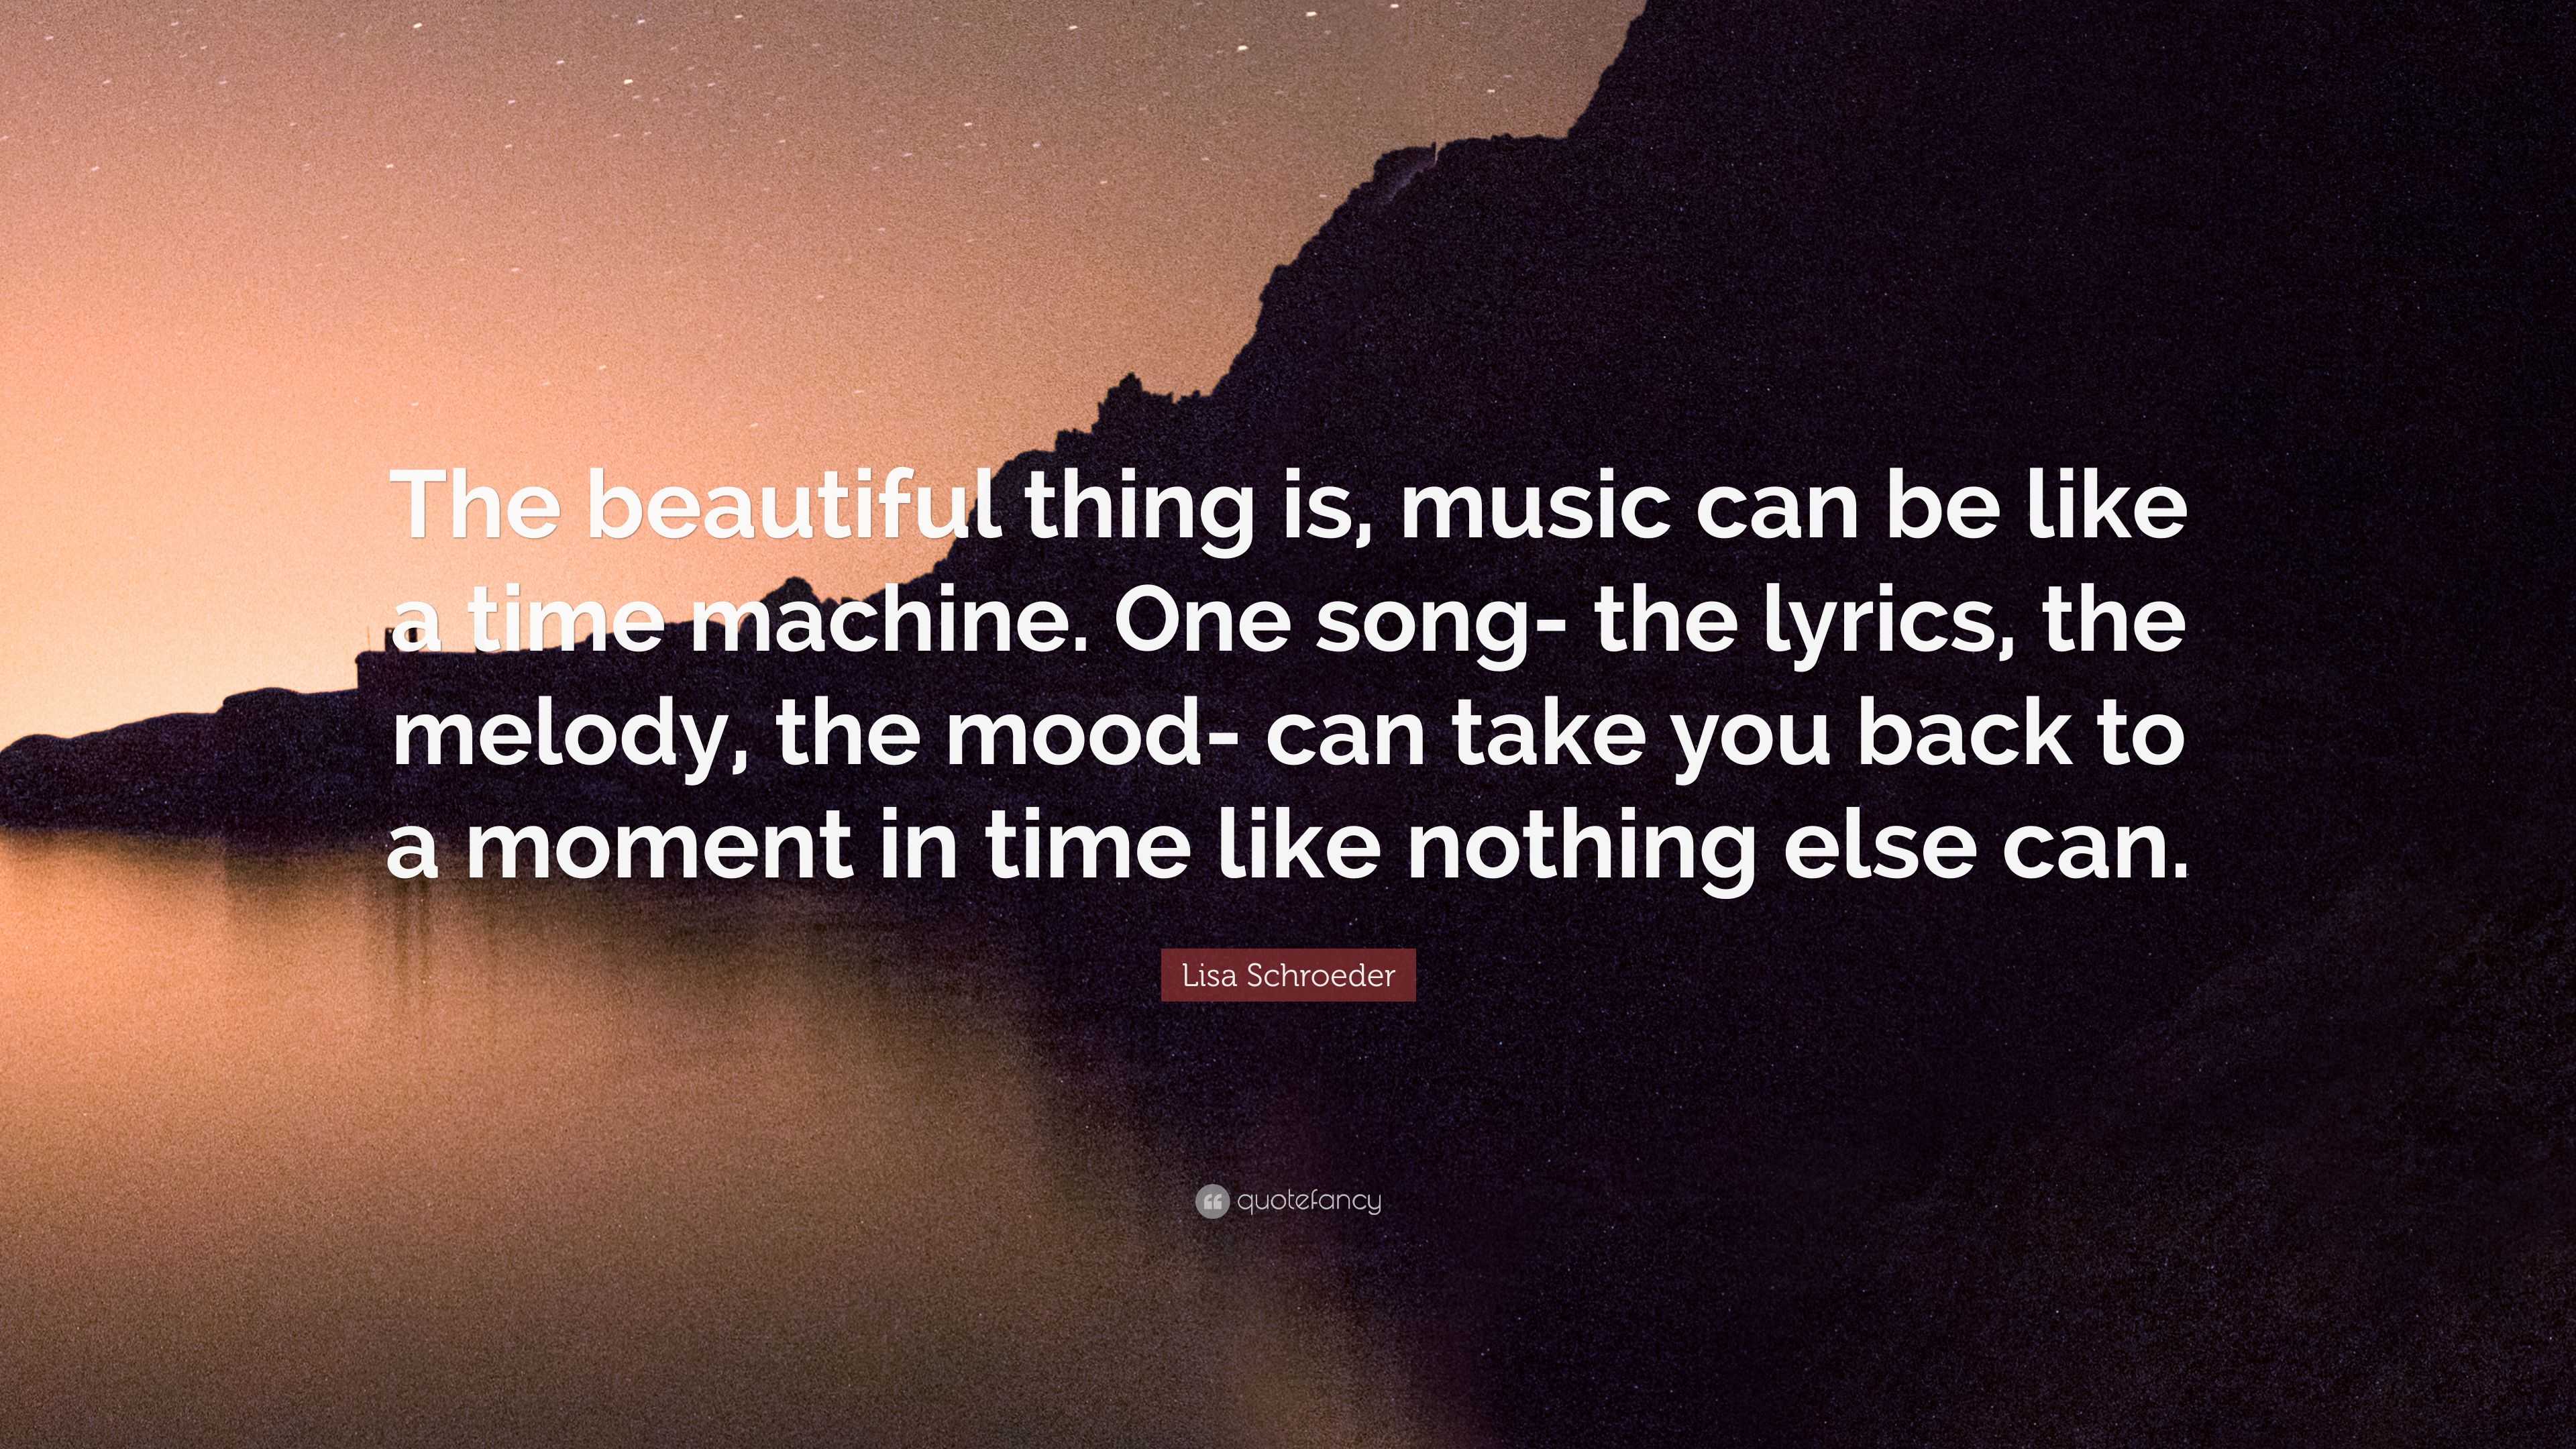 Lisa Schroeder Quote: “The beautiful thing is, music can be like a time ...